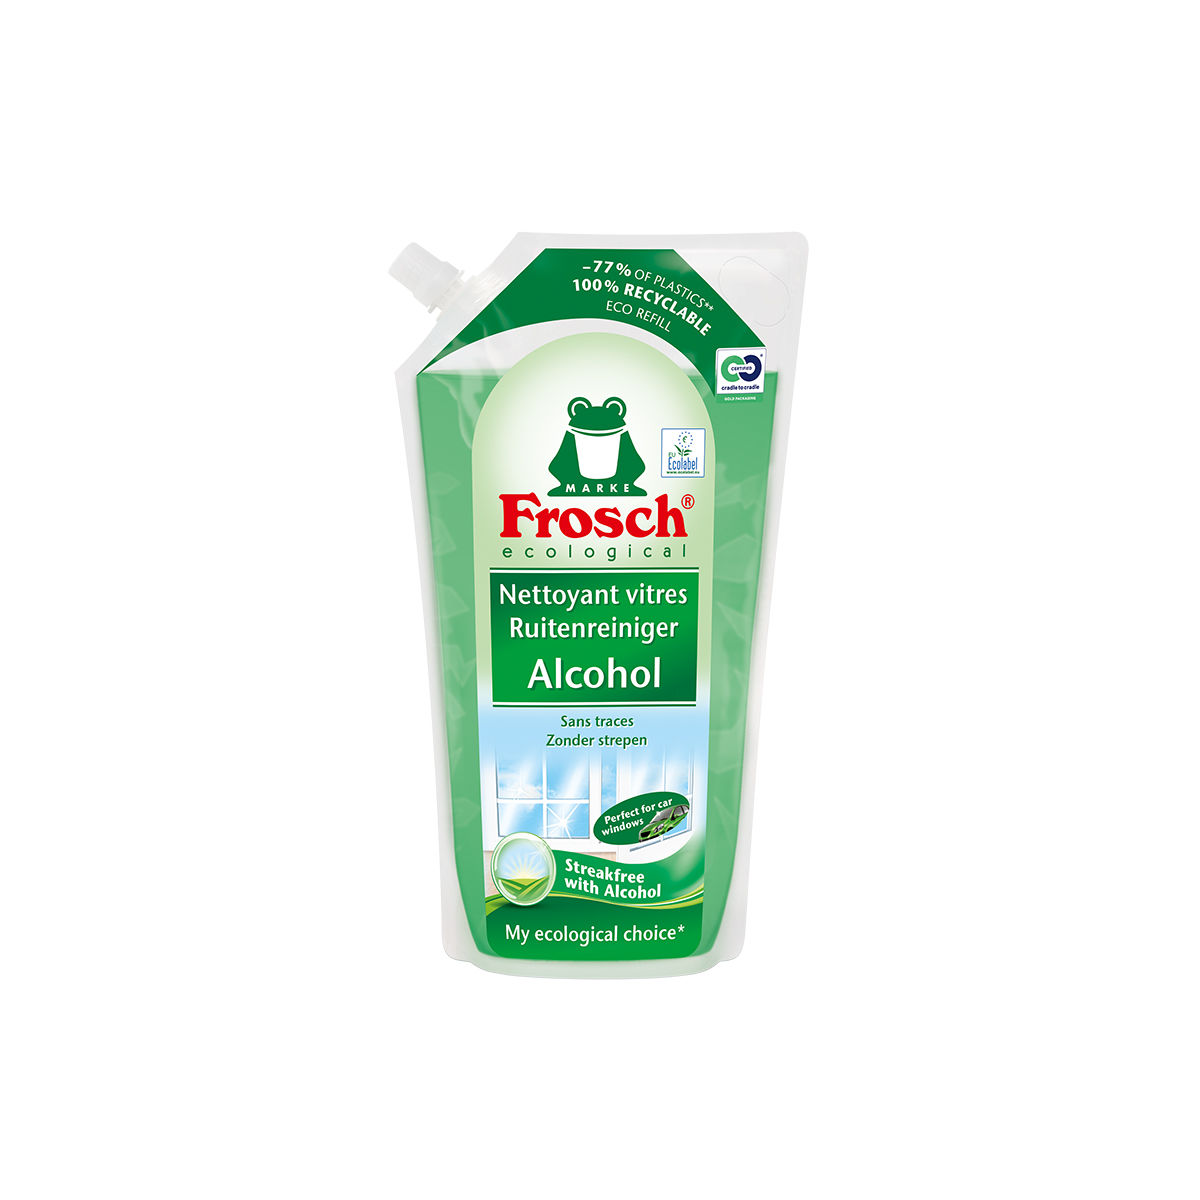 Frosch Ecological Nettoyant Vitres Alcohol 1000 ml